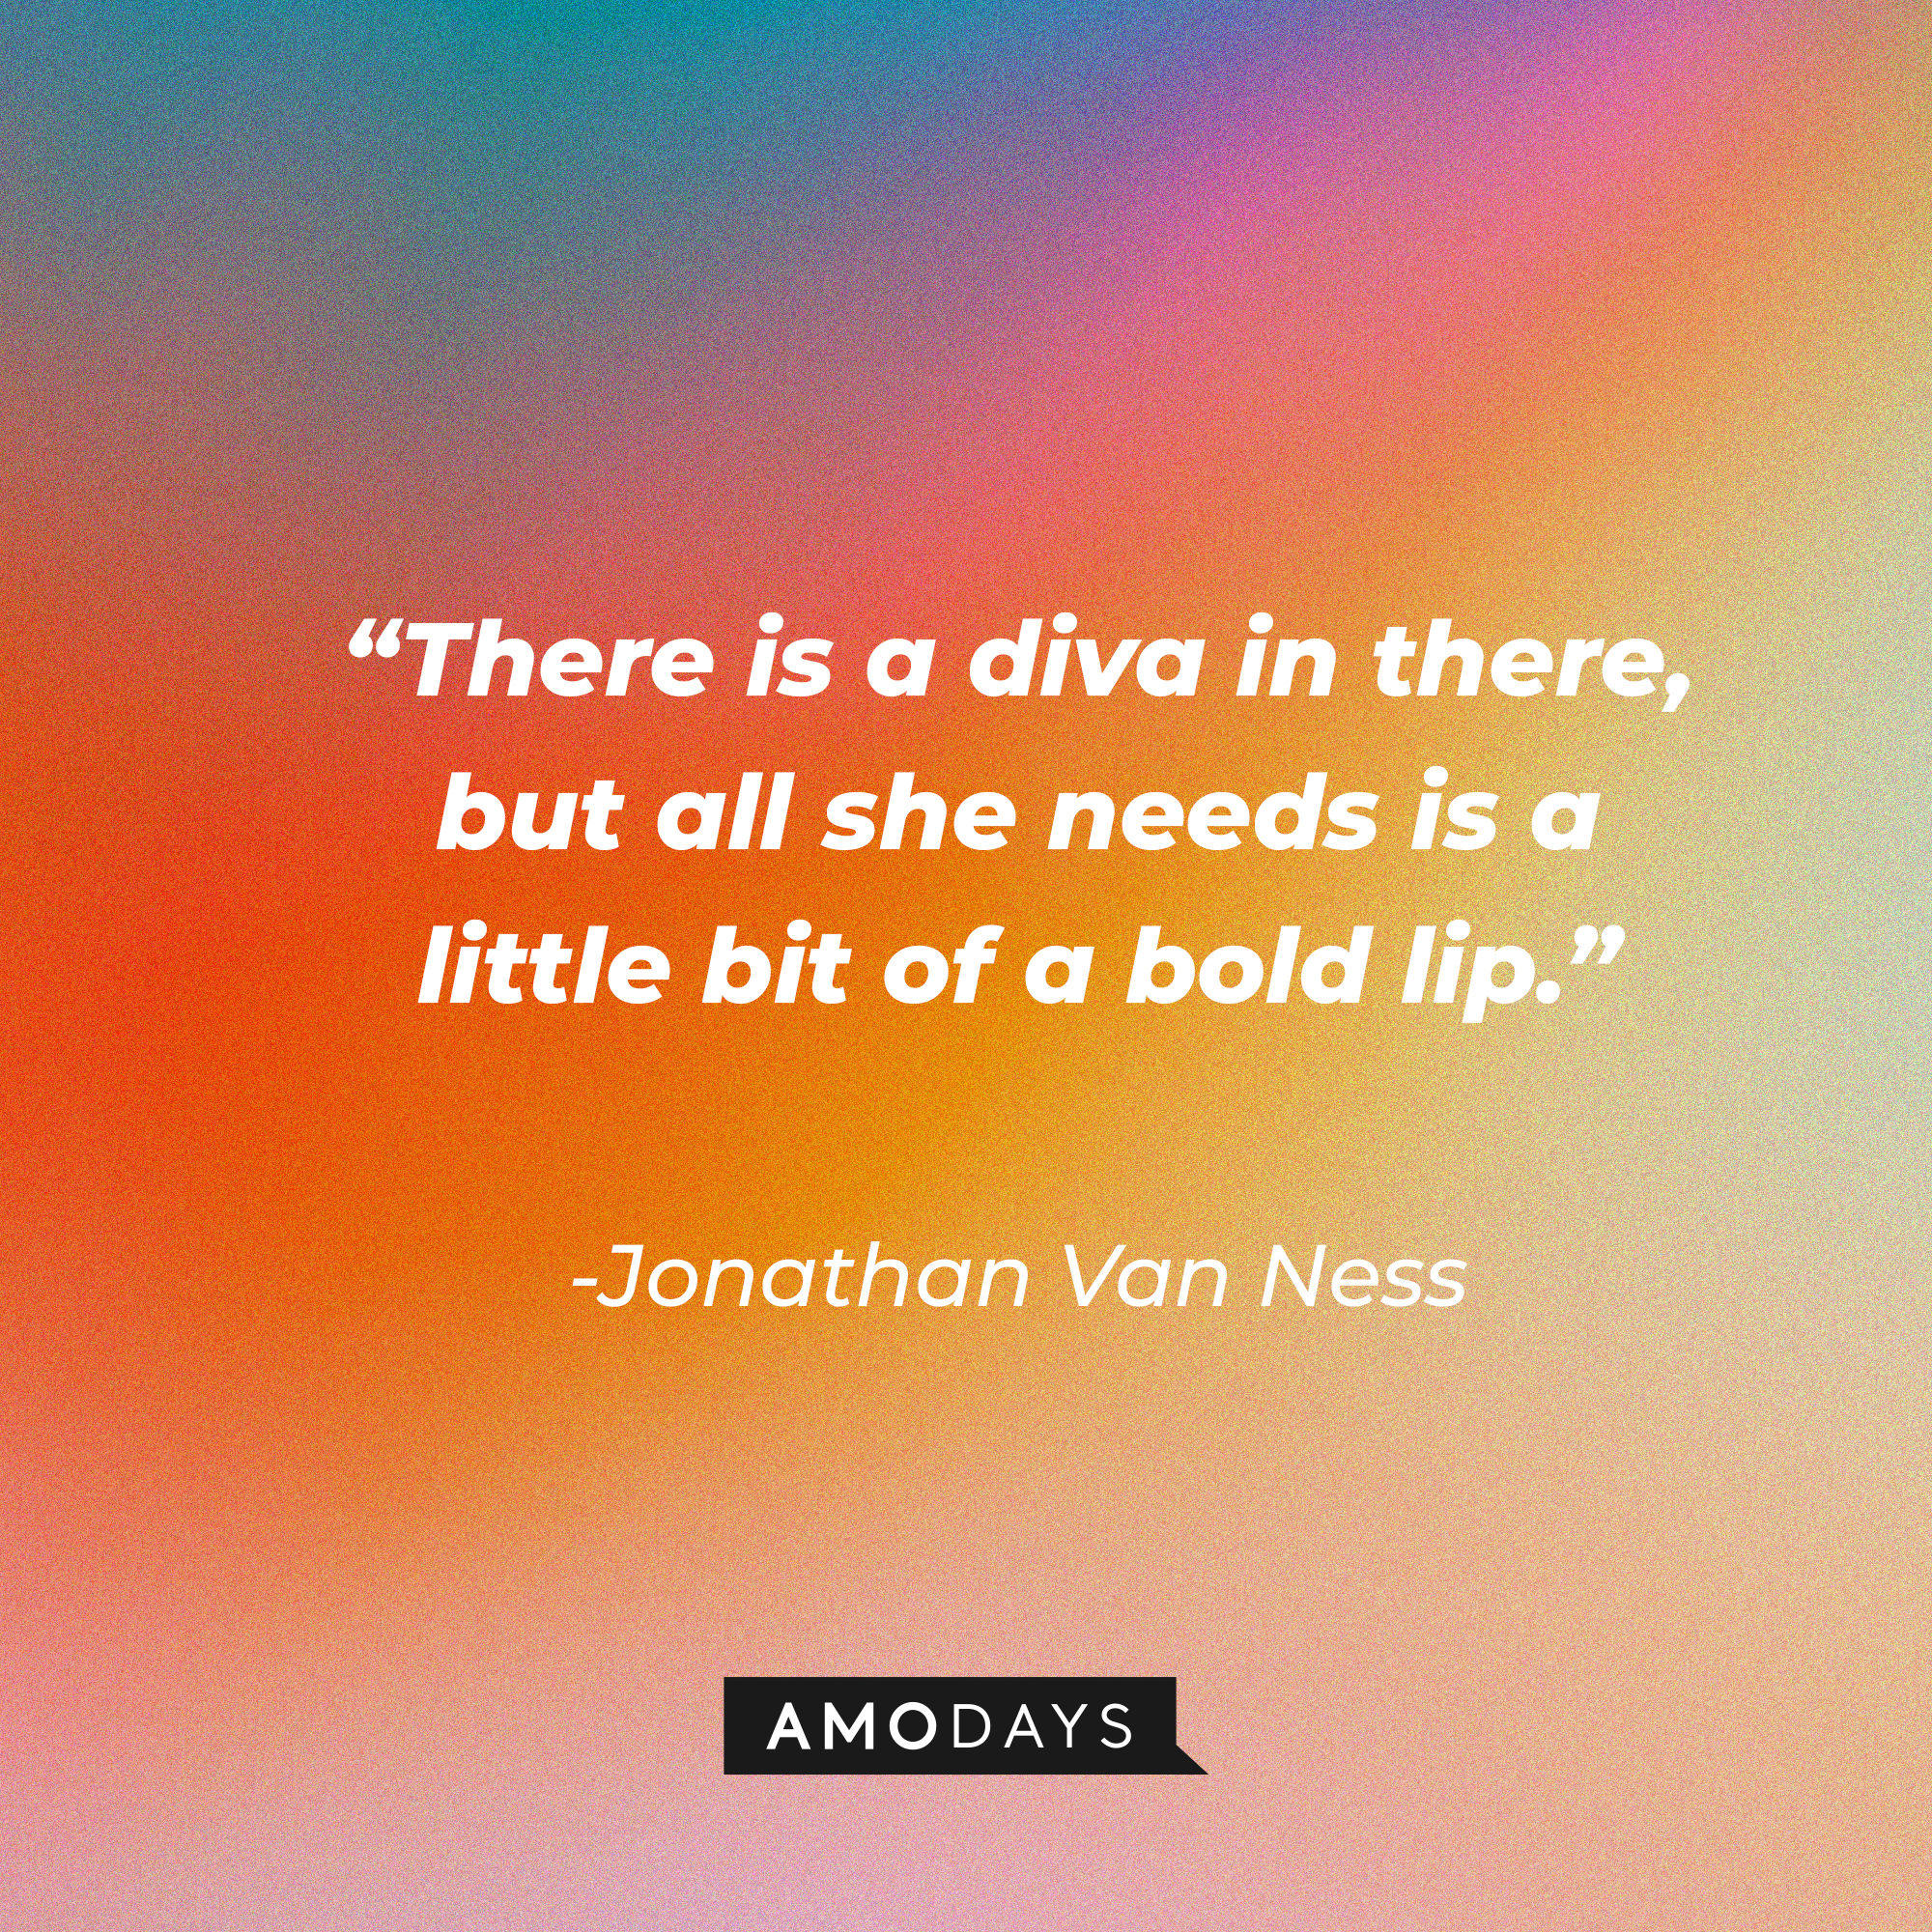 Jonathan Van Ness’s quote: “There is a diva in there, but all she needs is a little bit of a bold lip.” | Source: AmoDays